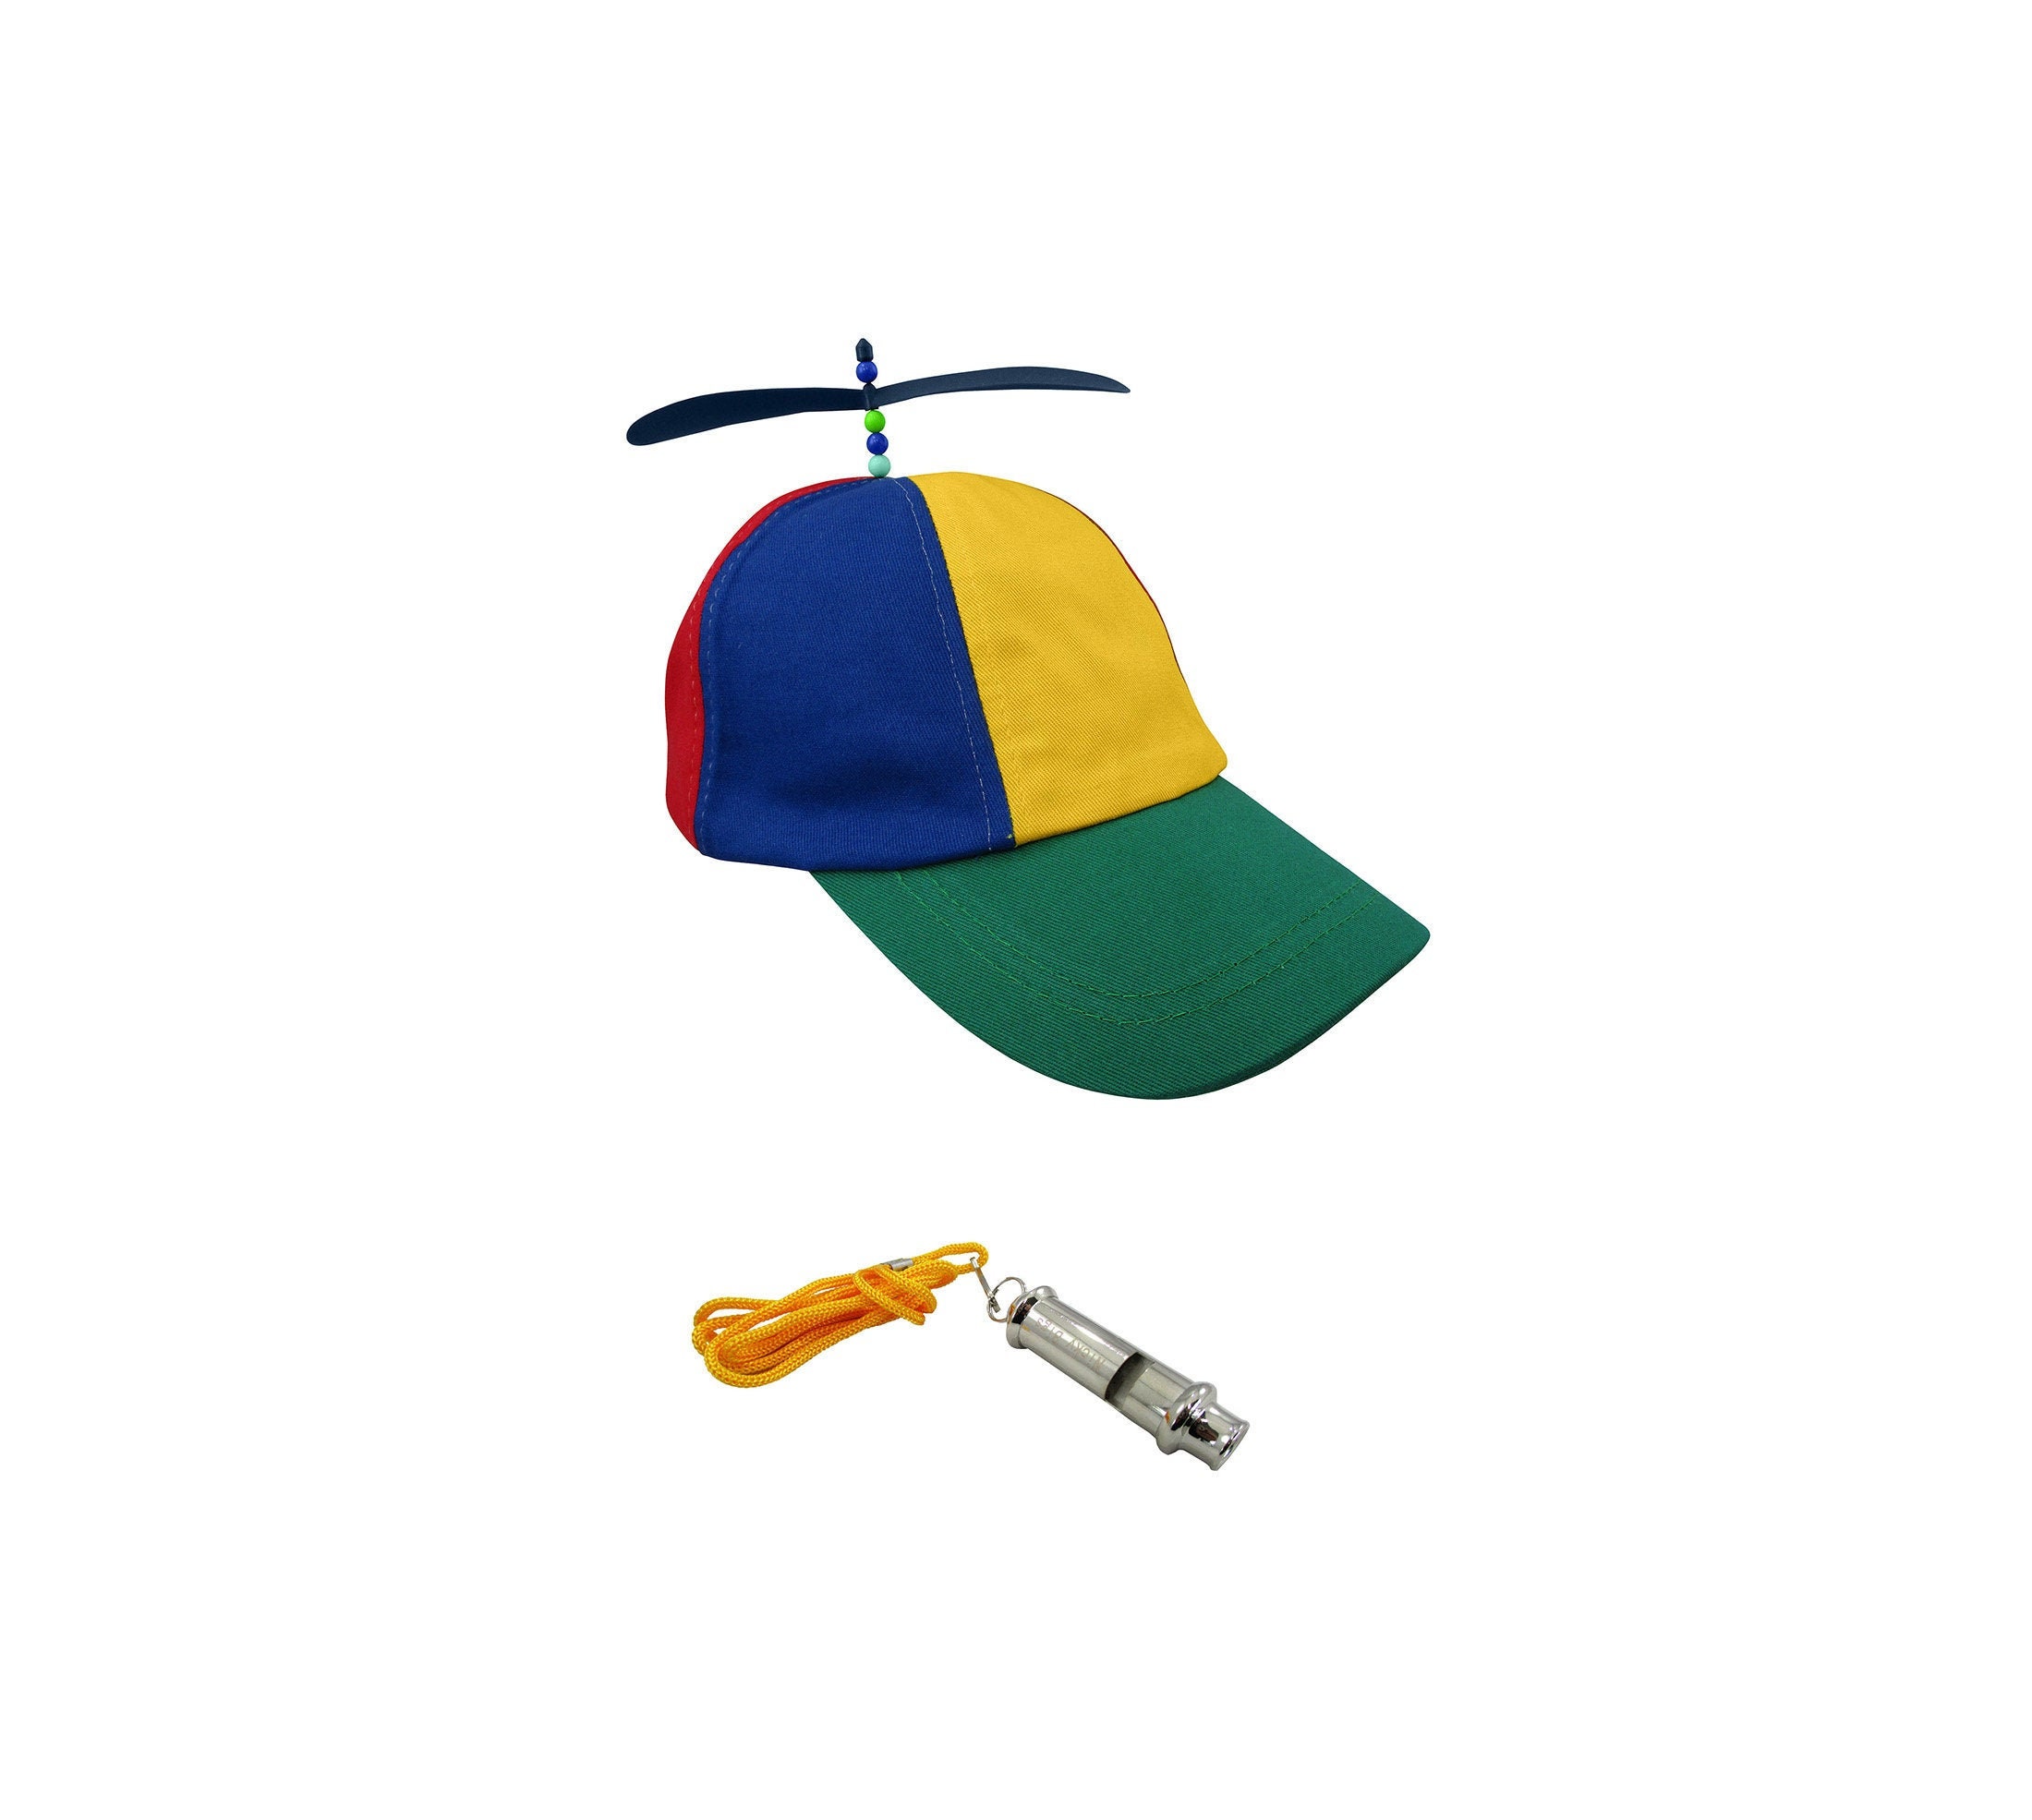 Unisex Adult Silly Propeller Beanie Hat and Metal Train Whistle With  Lanyard Noisemaker Fun Cap Costume Accessory Set Gag Joke Gift 